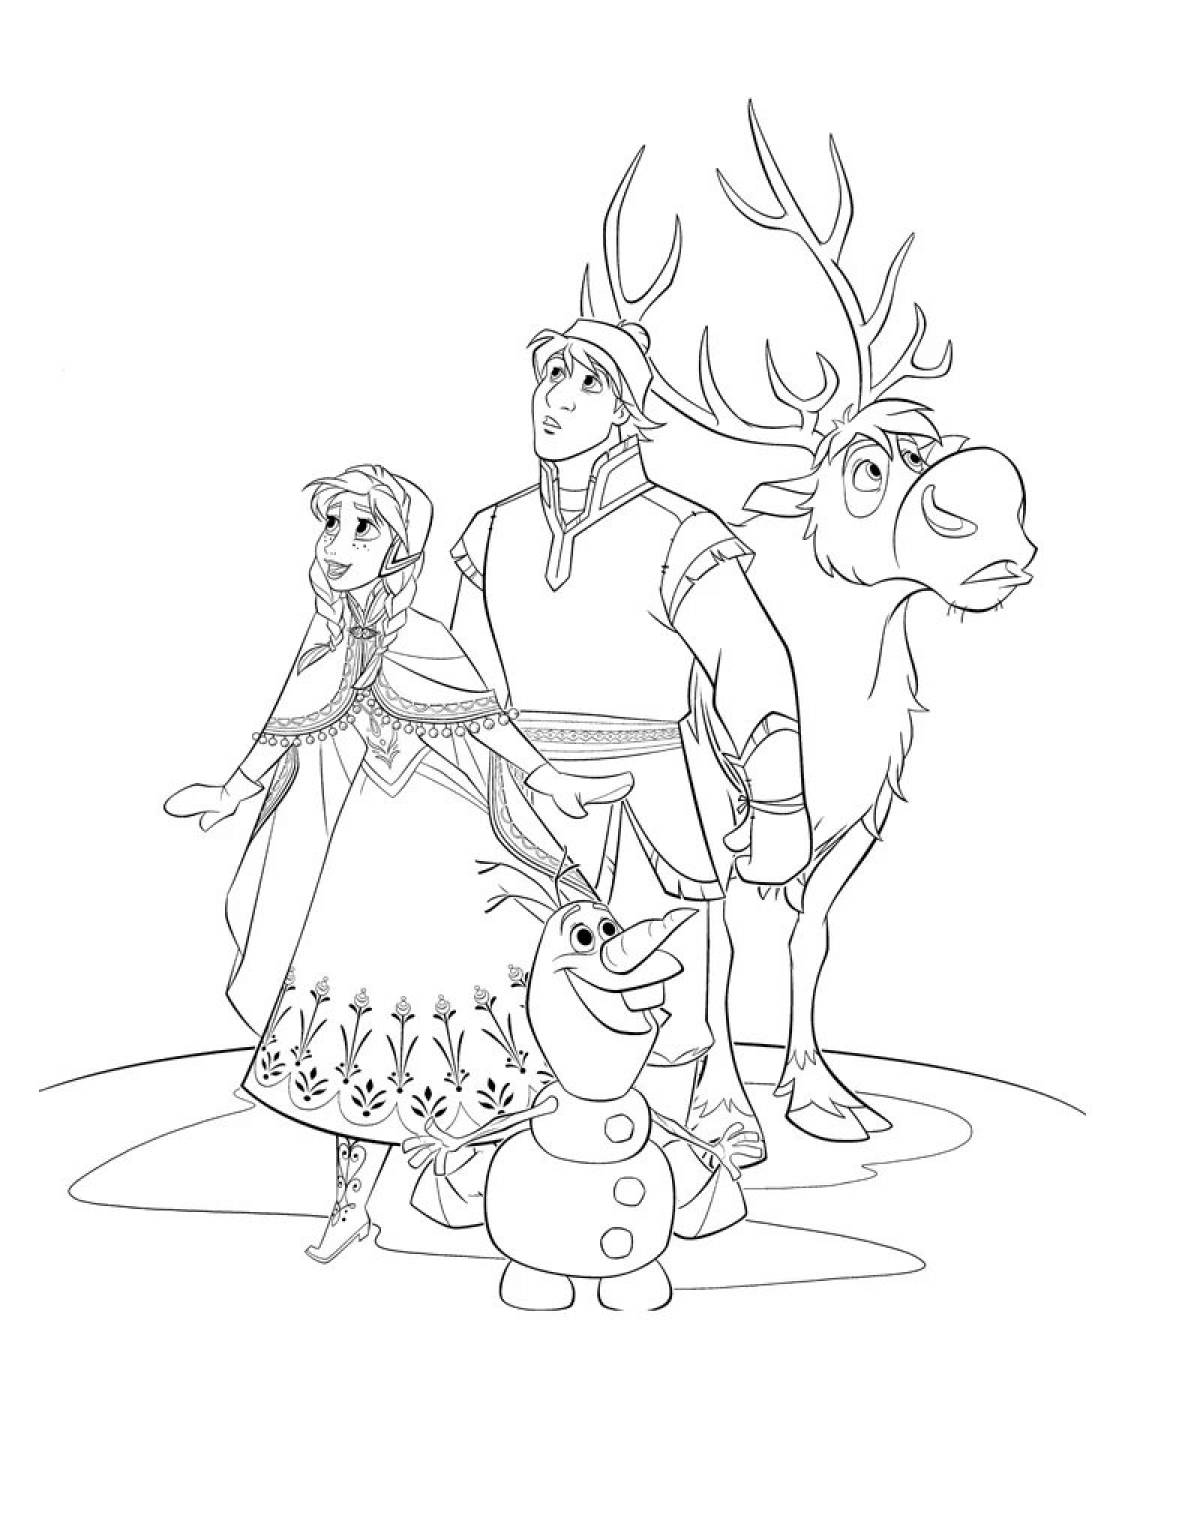 Elsa and olaf majestic coloring